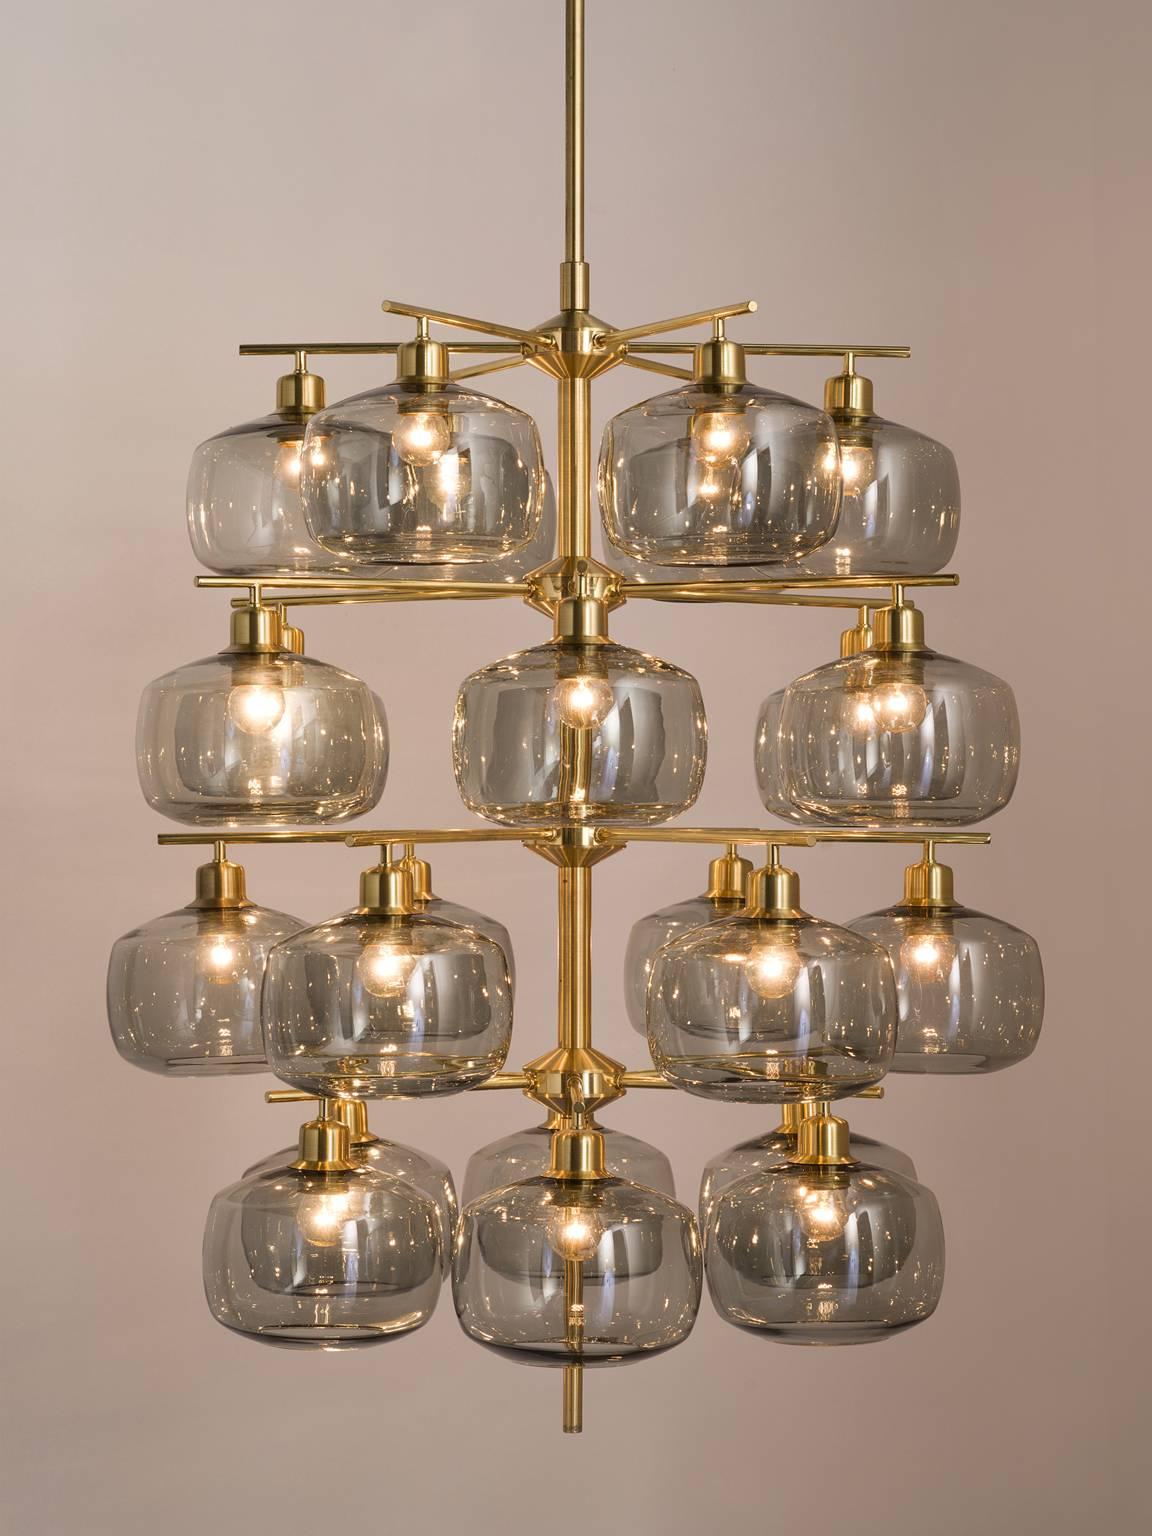 Set of eight chandeliers in brass and glass, 1952.

This large set of exceptional chandeliers feature a brass frame and translucent bulbs that resemble 'pressed' spheres. These Midcentury pendants are original thanks to the shape, quantity and